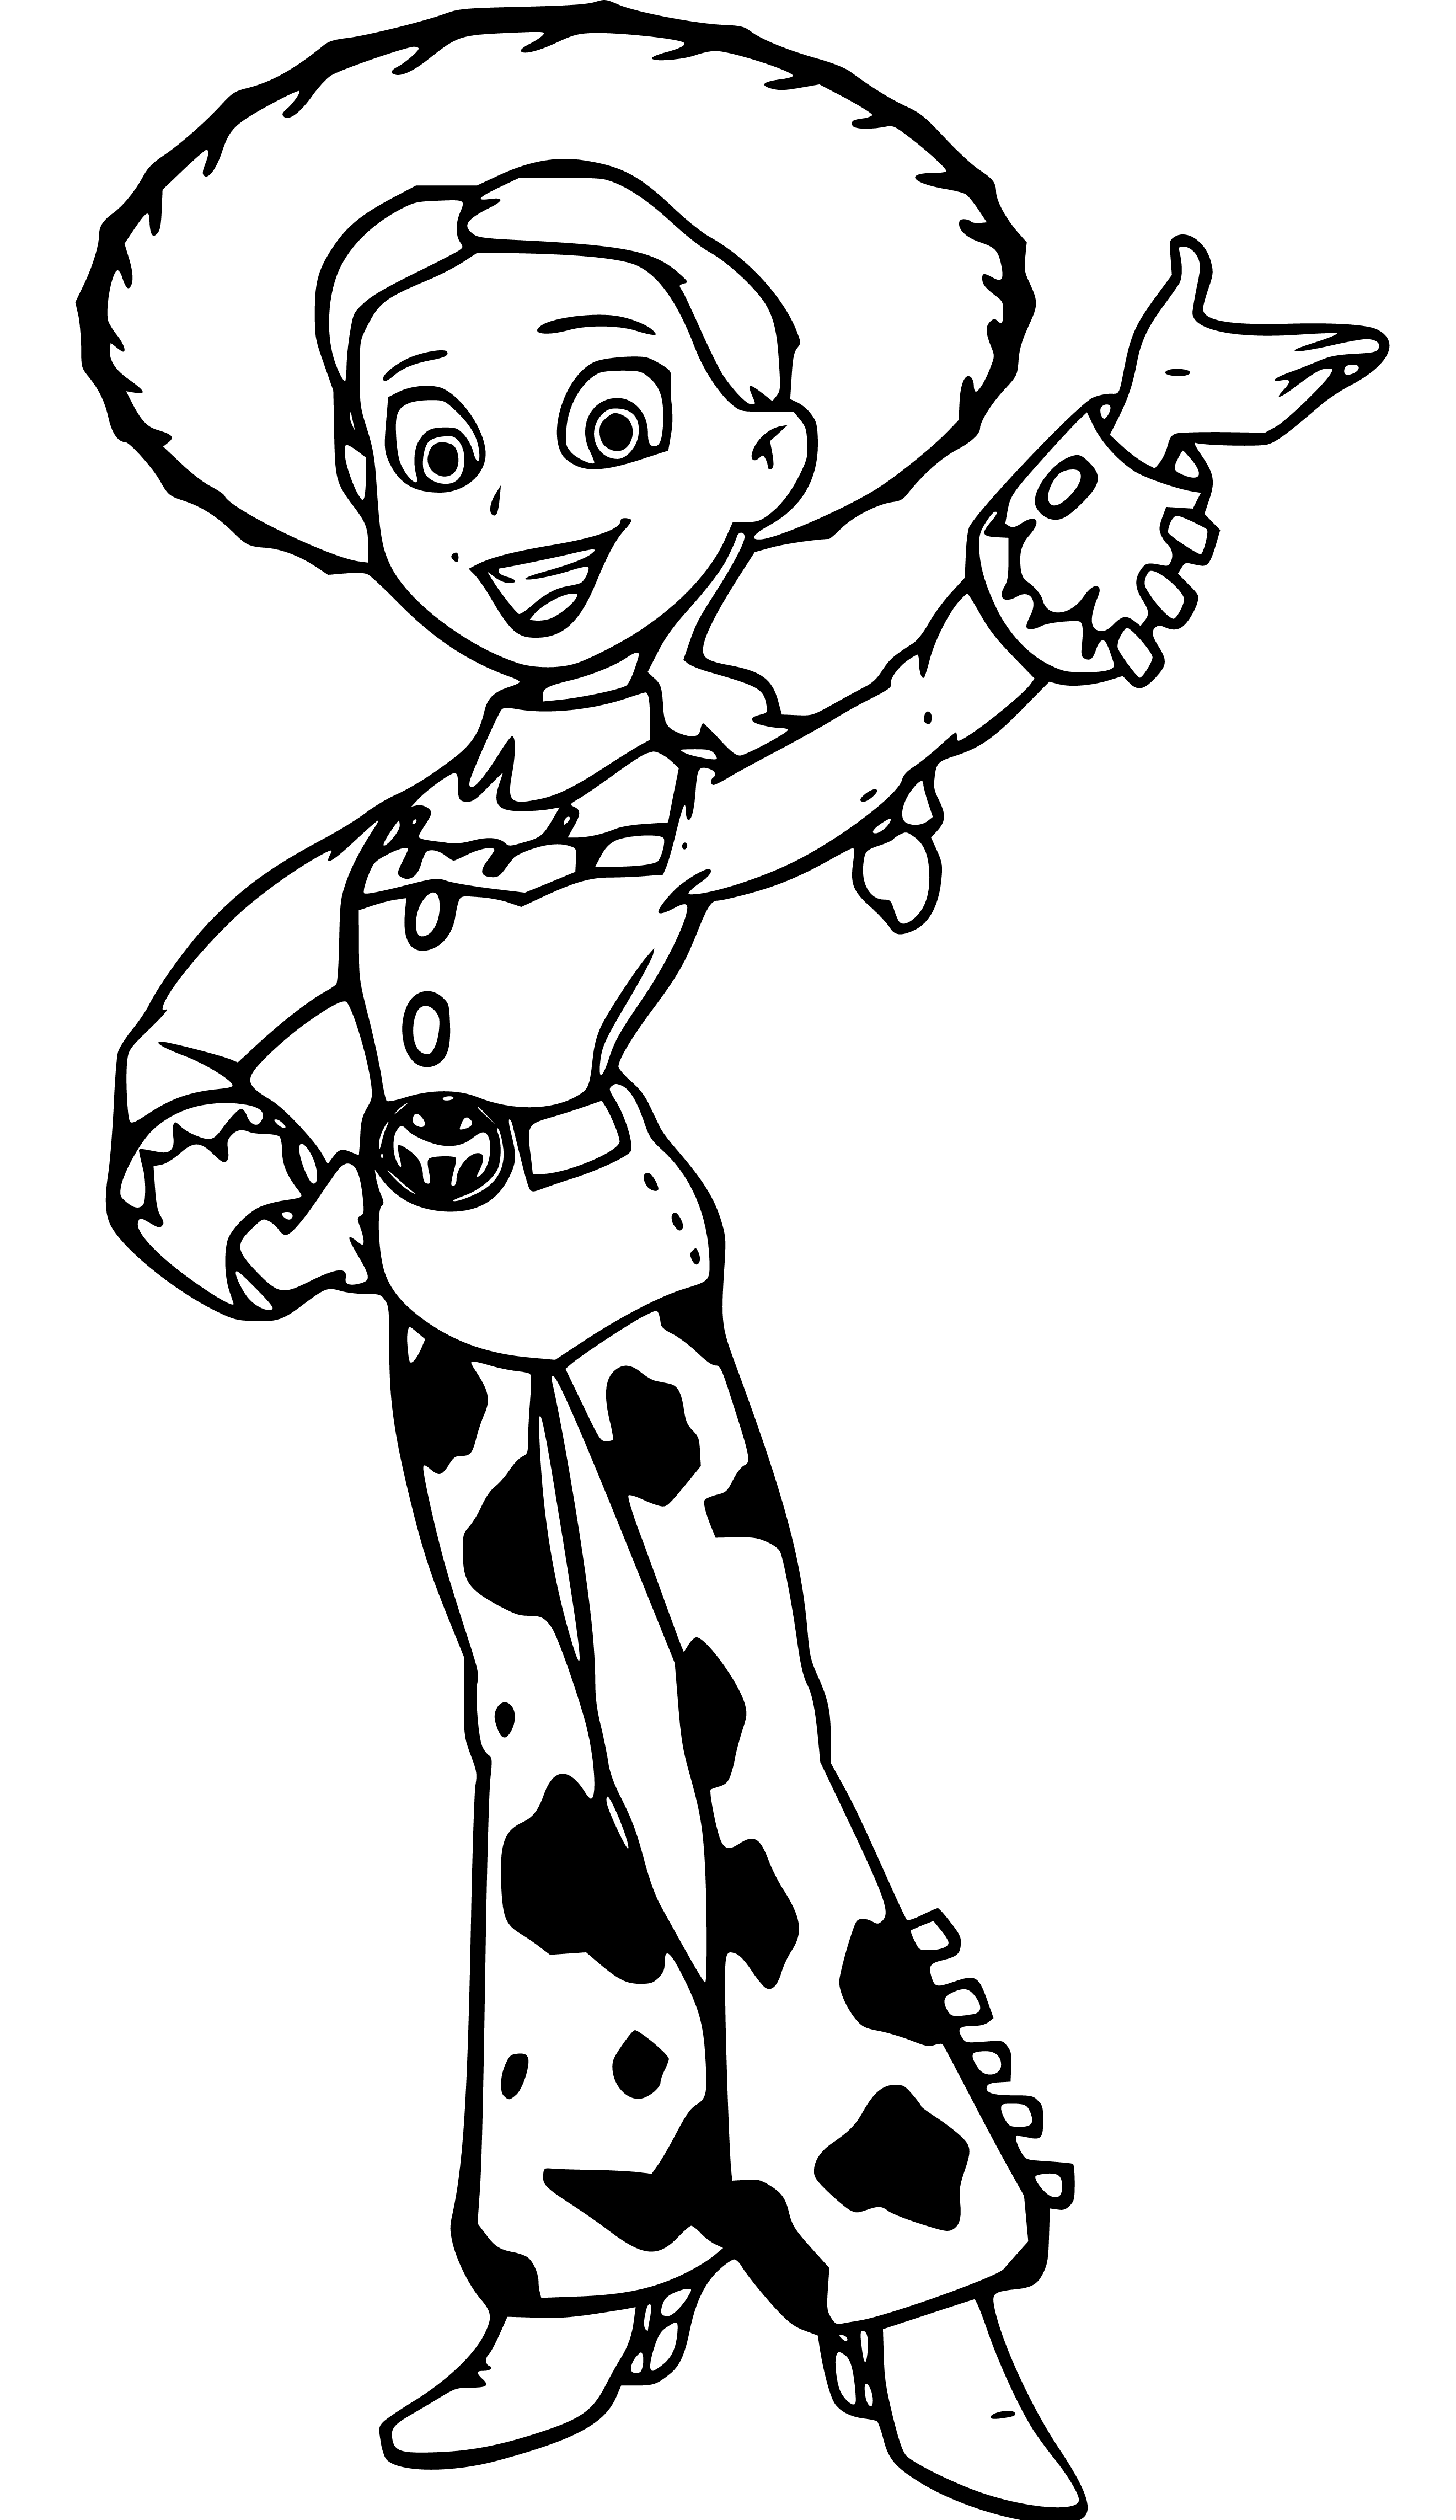 Jessie Coloring Page Toy Story drawing - SheetalColor.com